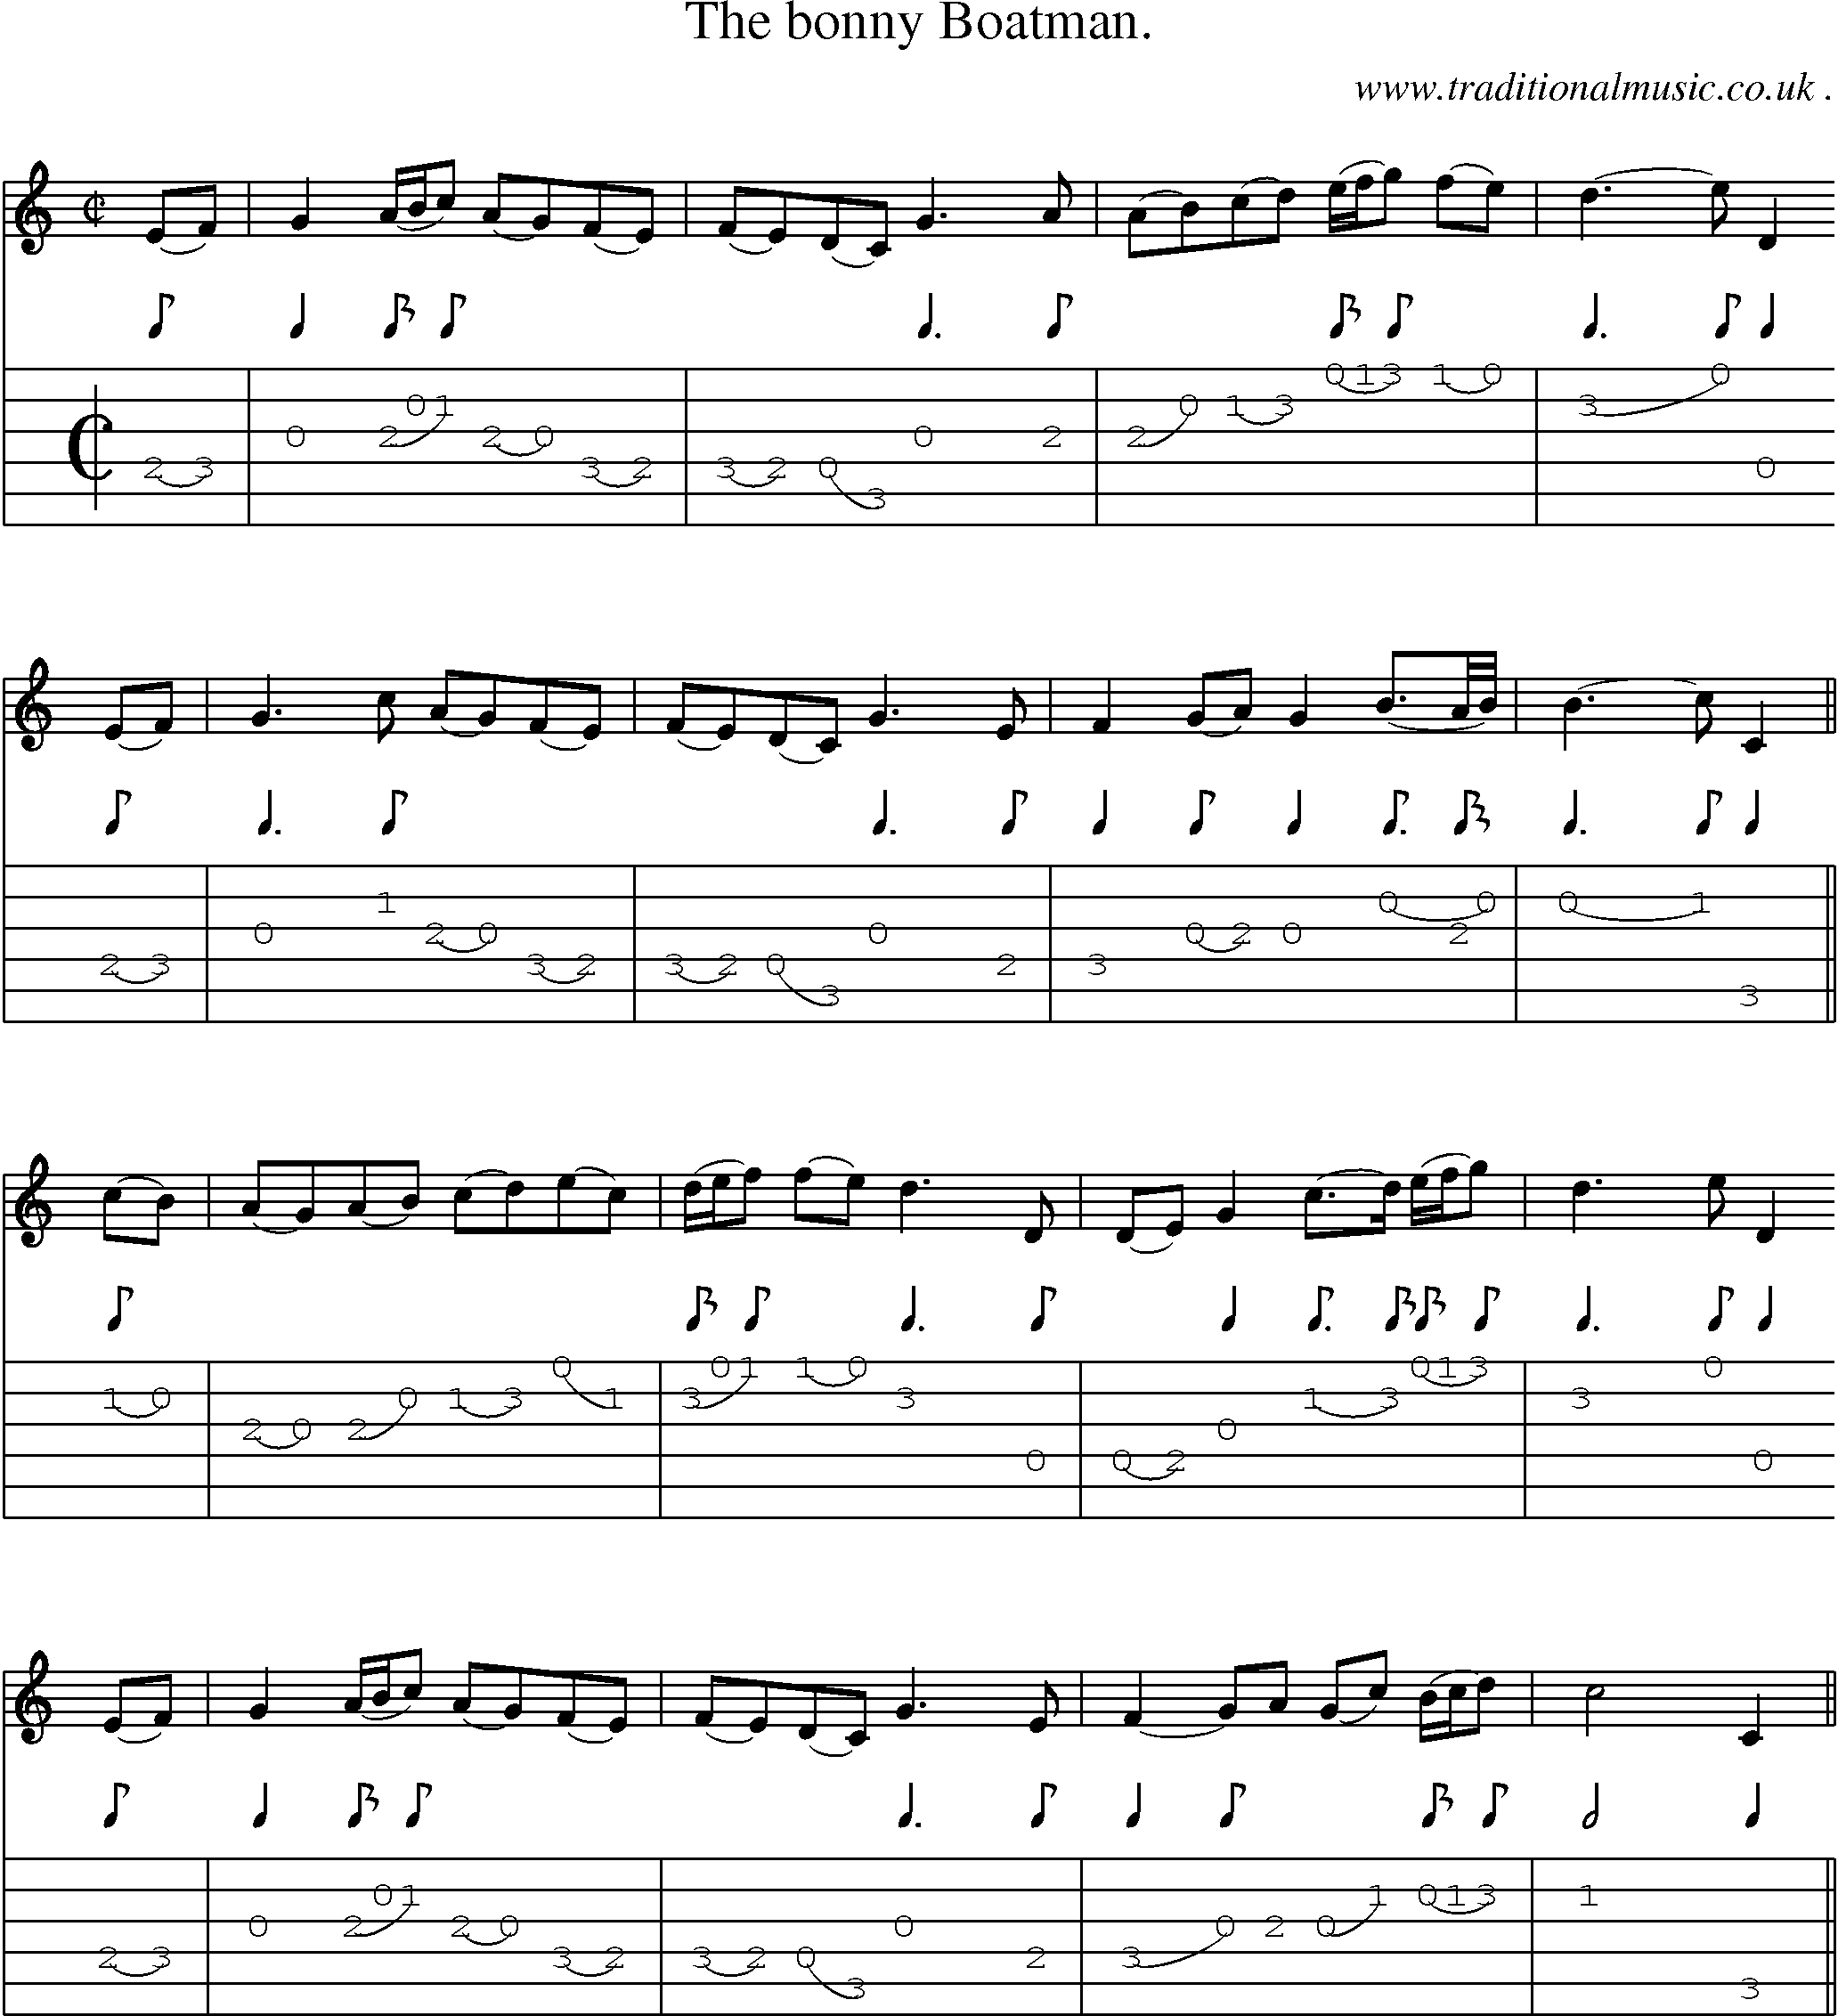 Sheet-Music and Guitar Tabs for The Bonny Boatman